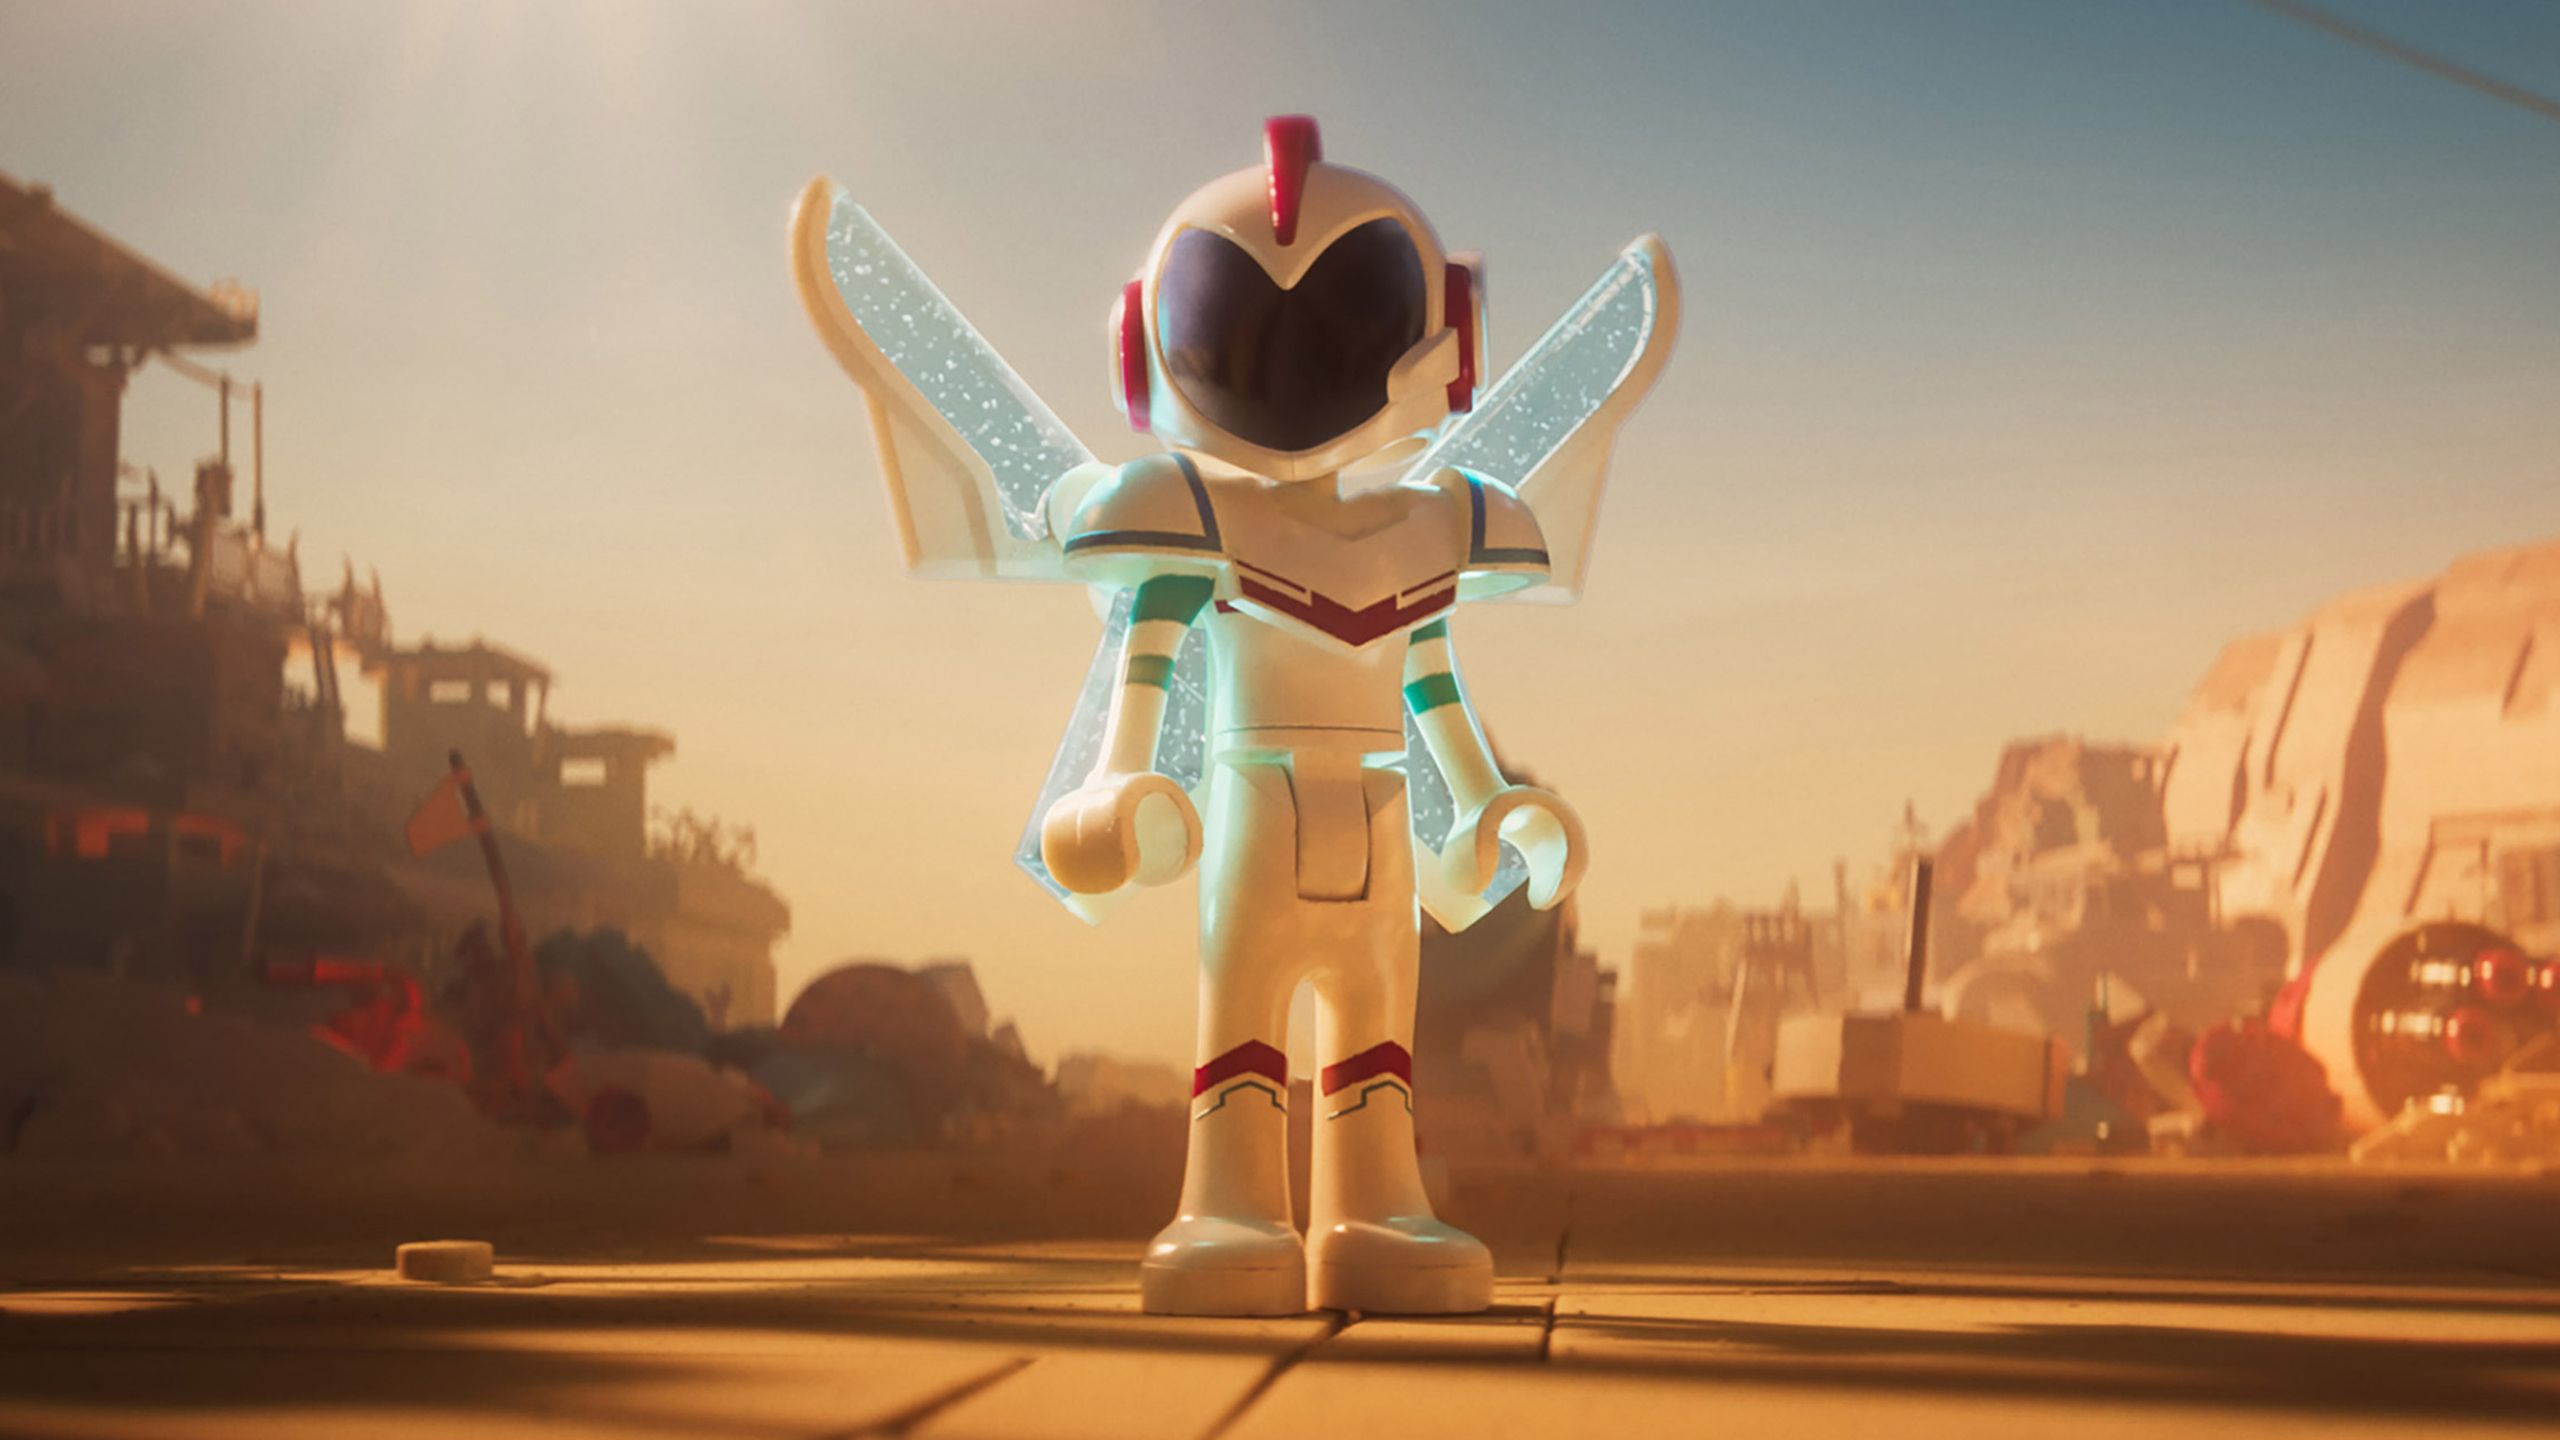 Image in filmmaker mode from the Lego Movie 2